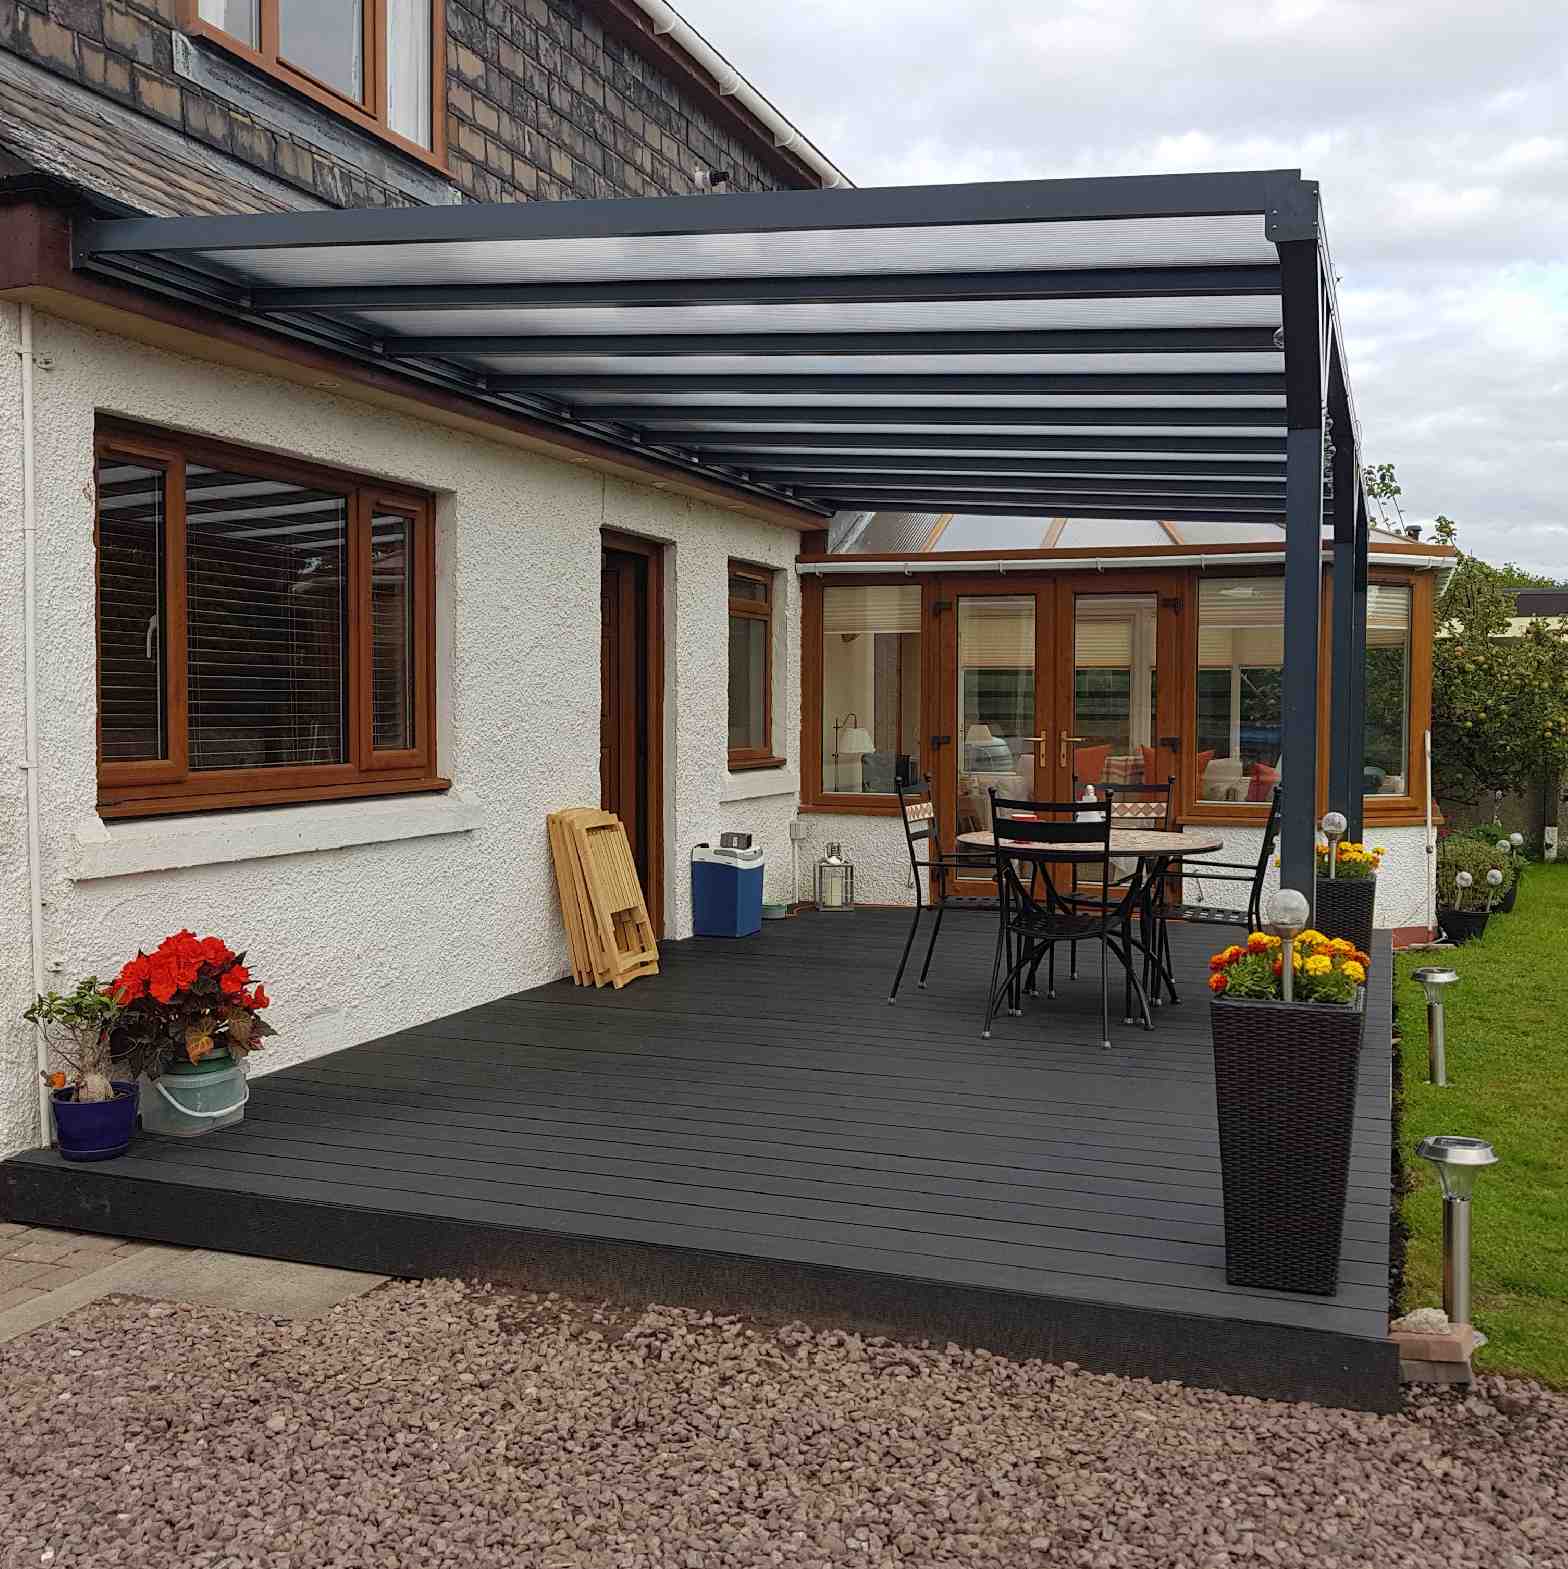 Buy Omega Verandah, Anthracite Grey, 16mm Polycarbonate Glazing - 5.6m (W) x 3.5m (P), (3) Supporting Posts online today